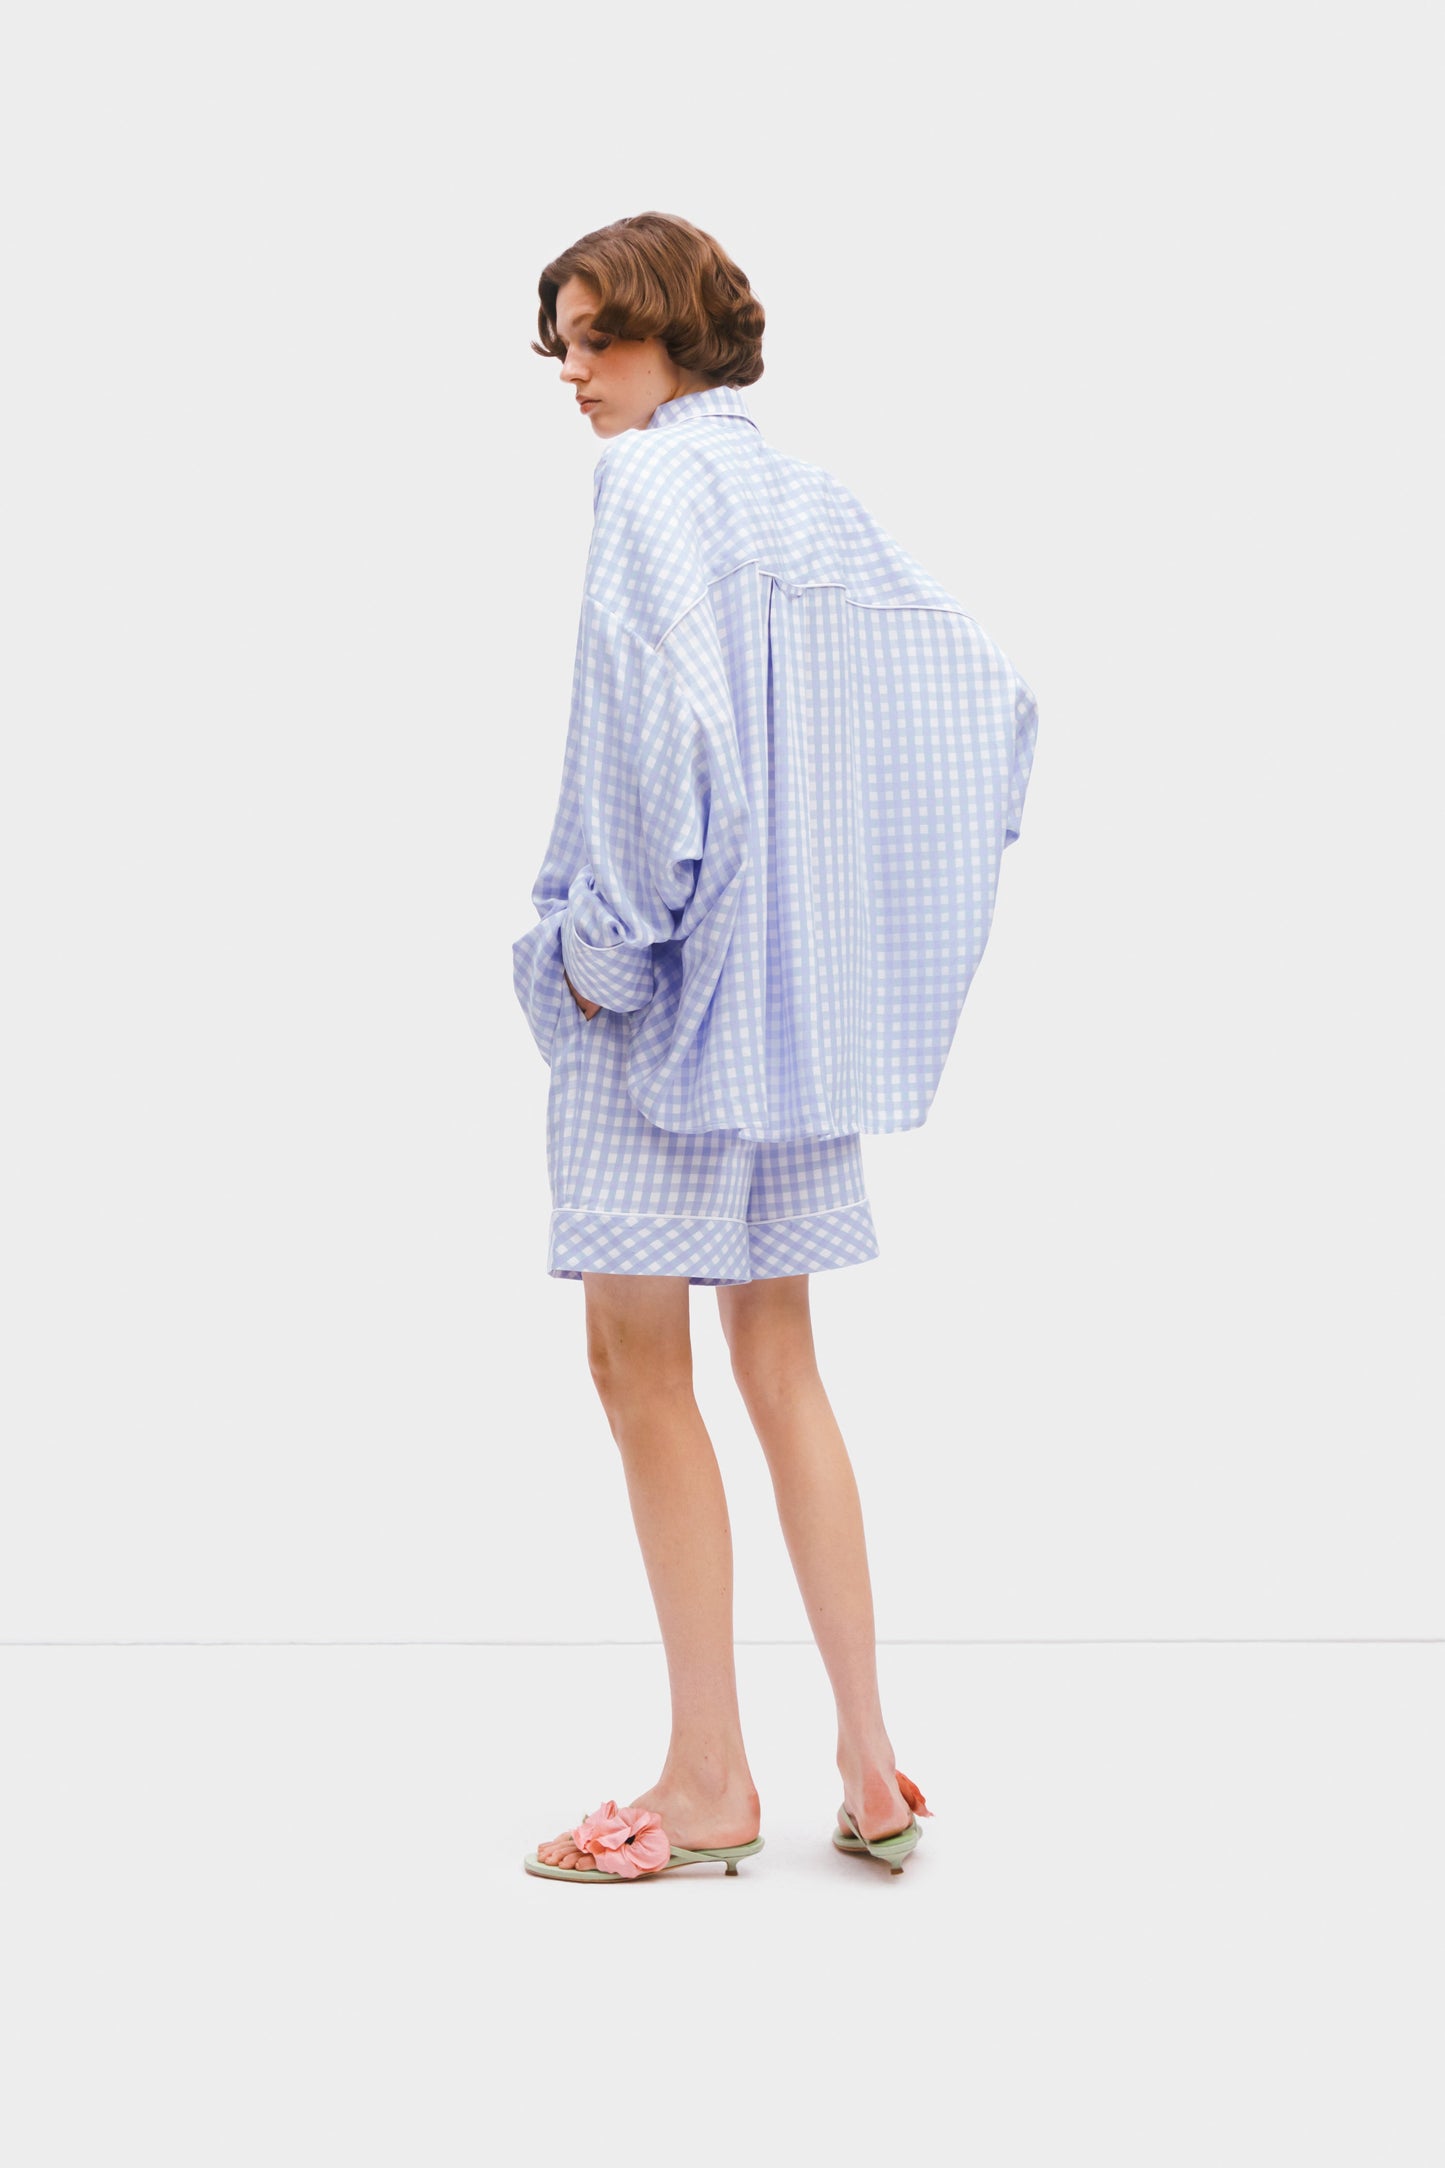 Pastelle Oversized Shorts in Blue Vichy